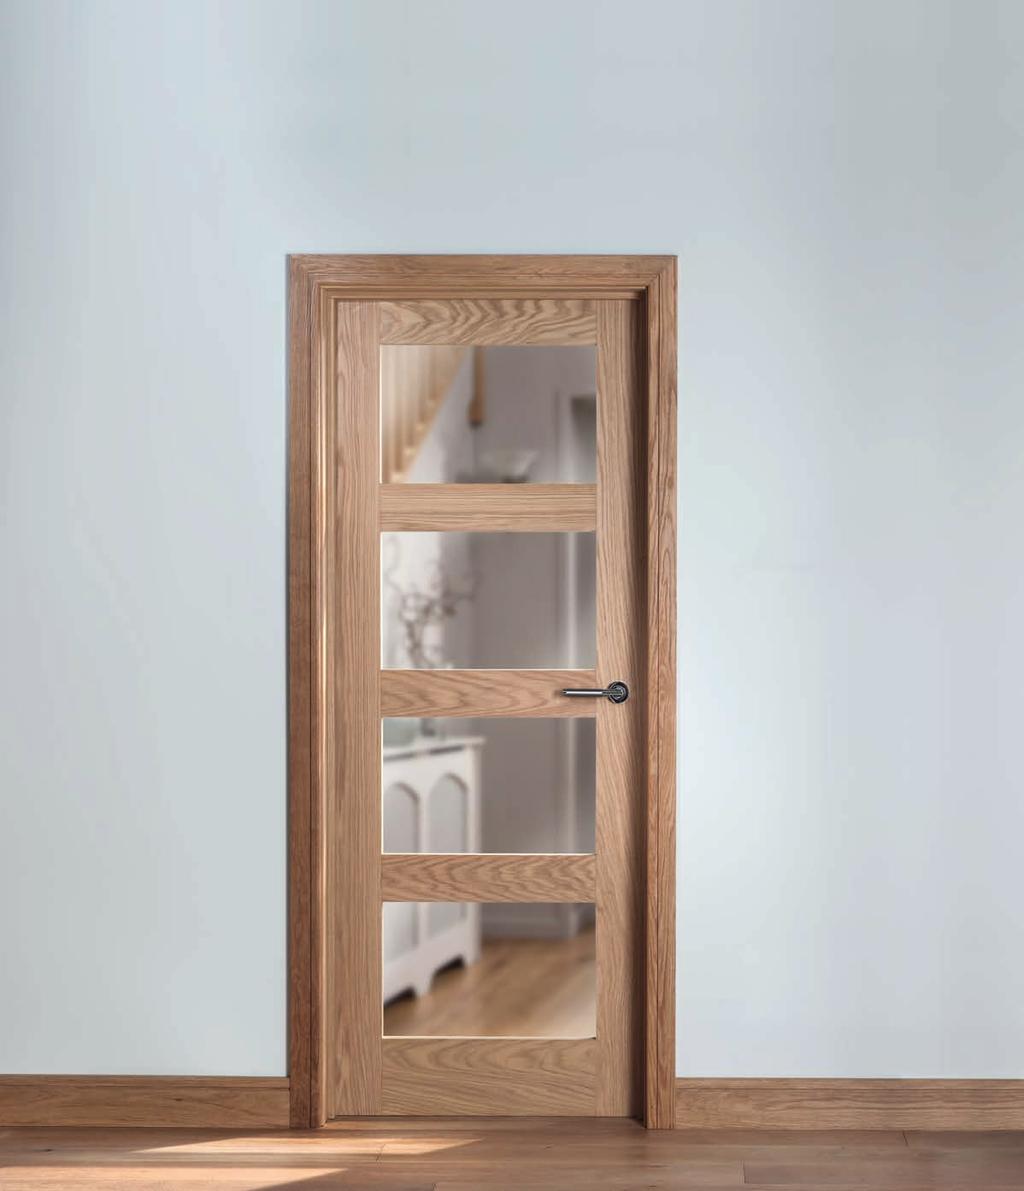 Beautiful oak products with inspirational features We are proud to offer